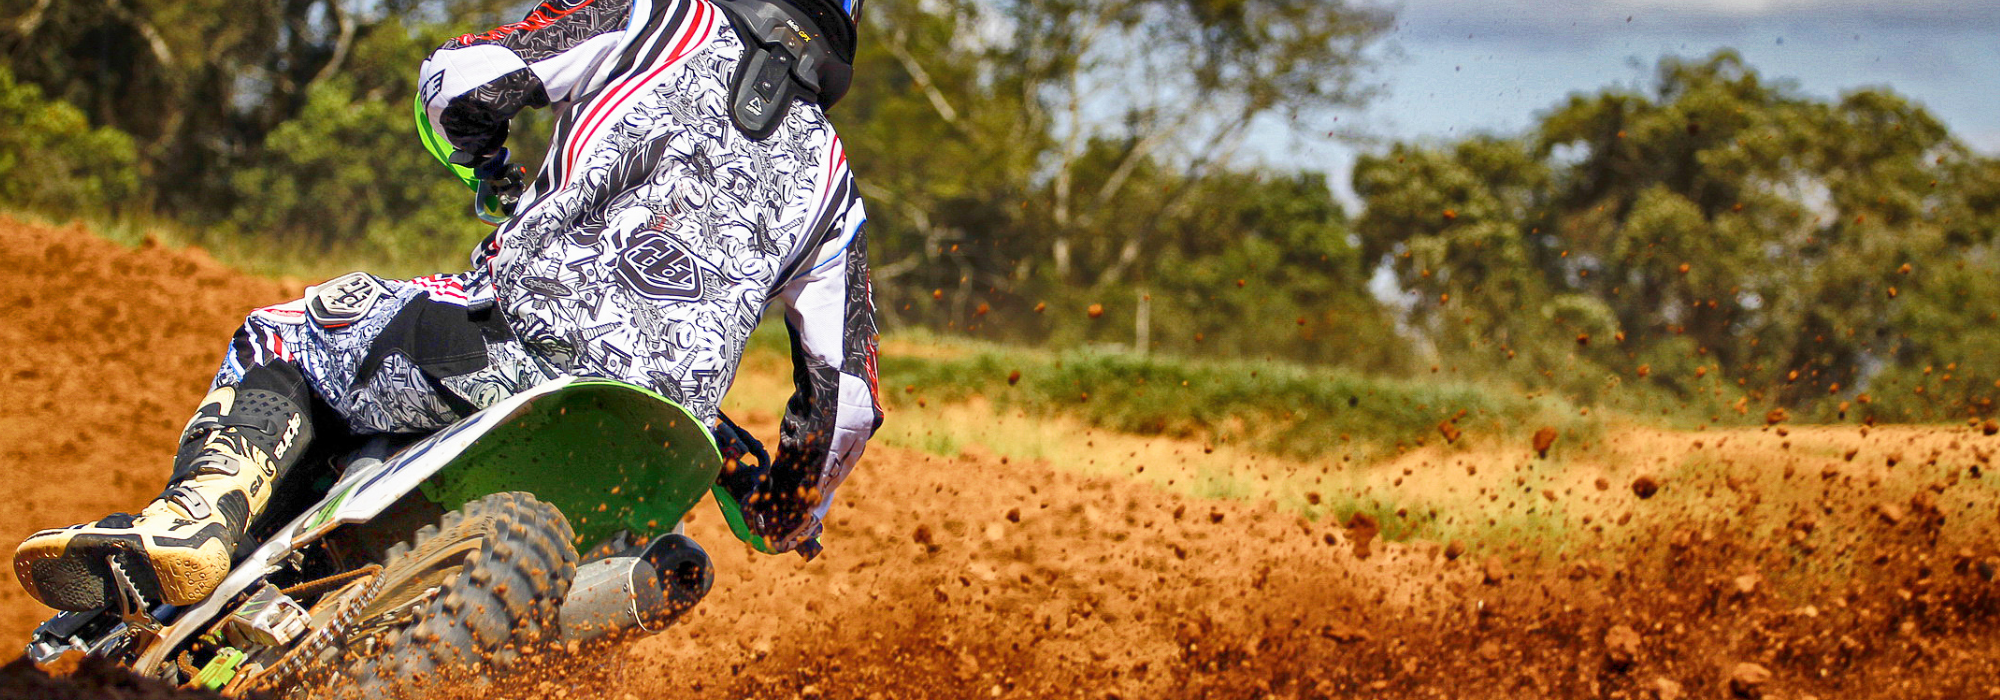 Challenging Race Moments in a Motocross Career